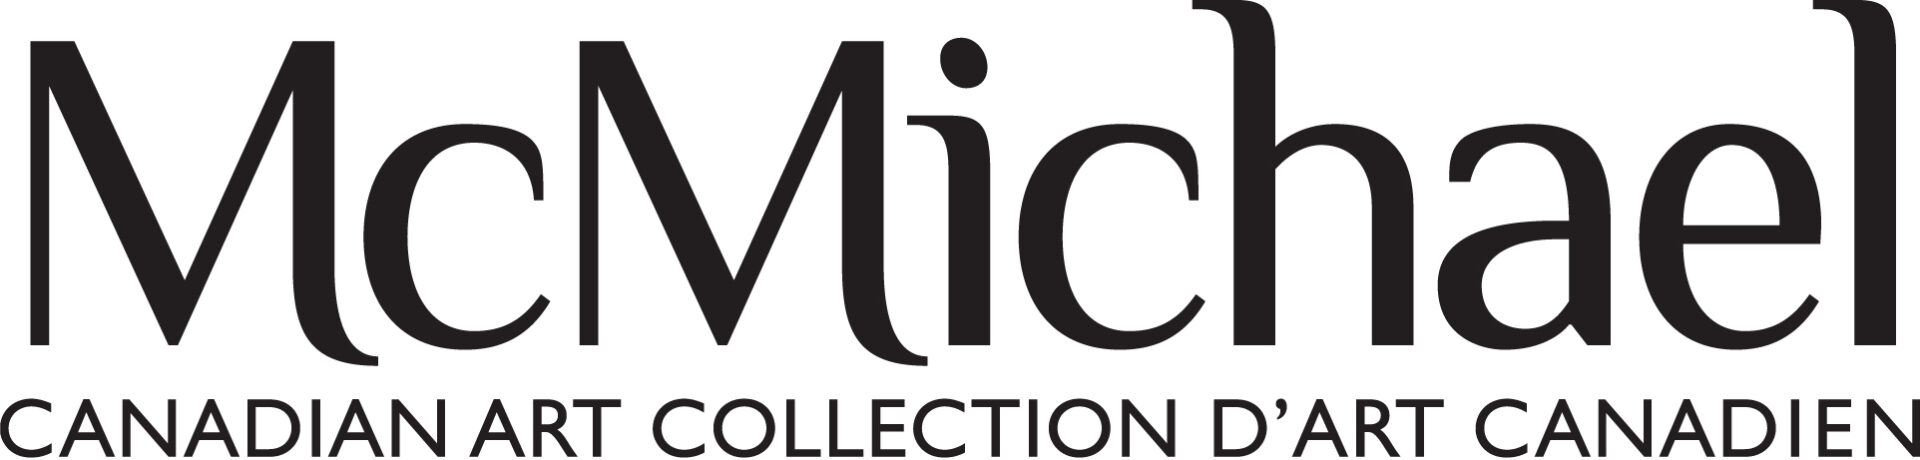 Logo of McMichael Canadian Art Collection with text "McMichael Canadian Art Collection d'Art Canadien" in black font on a white background.